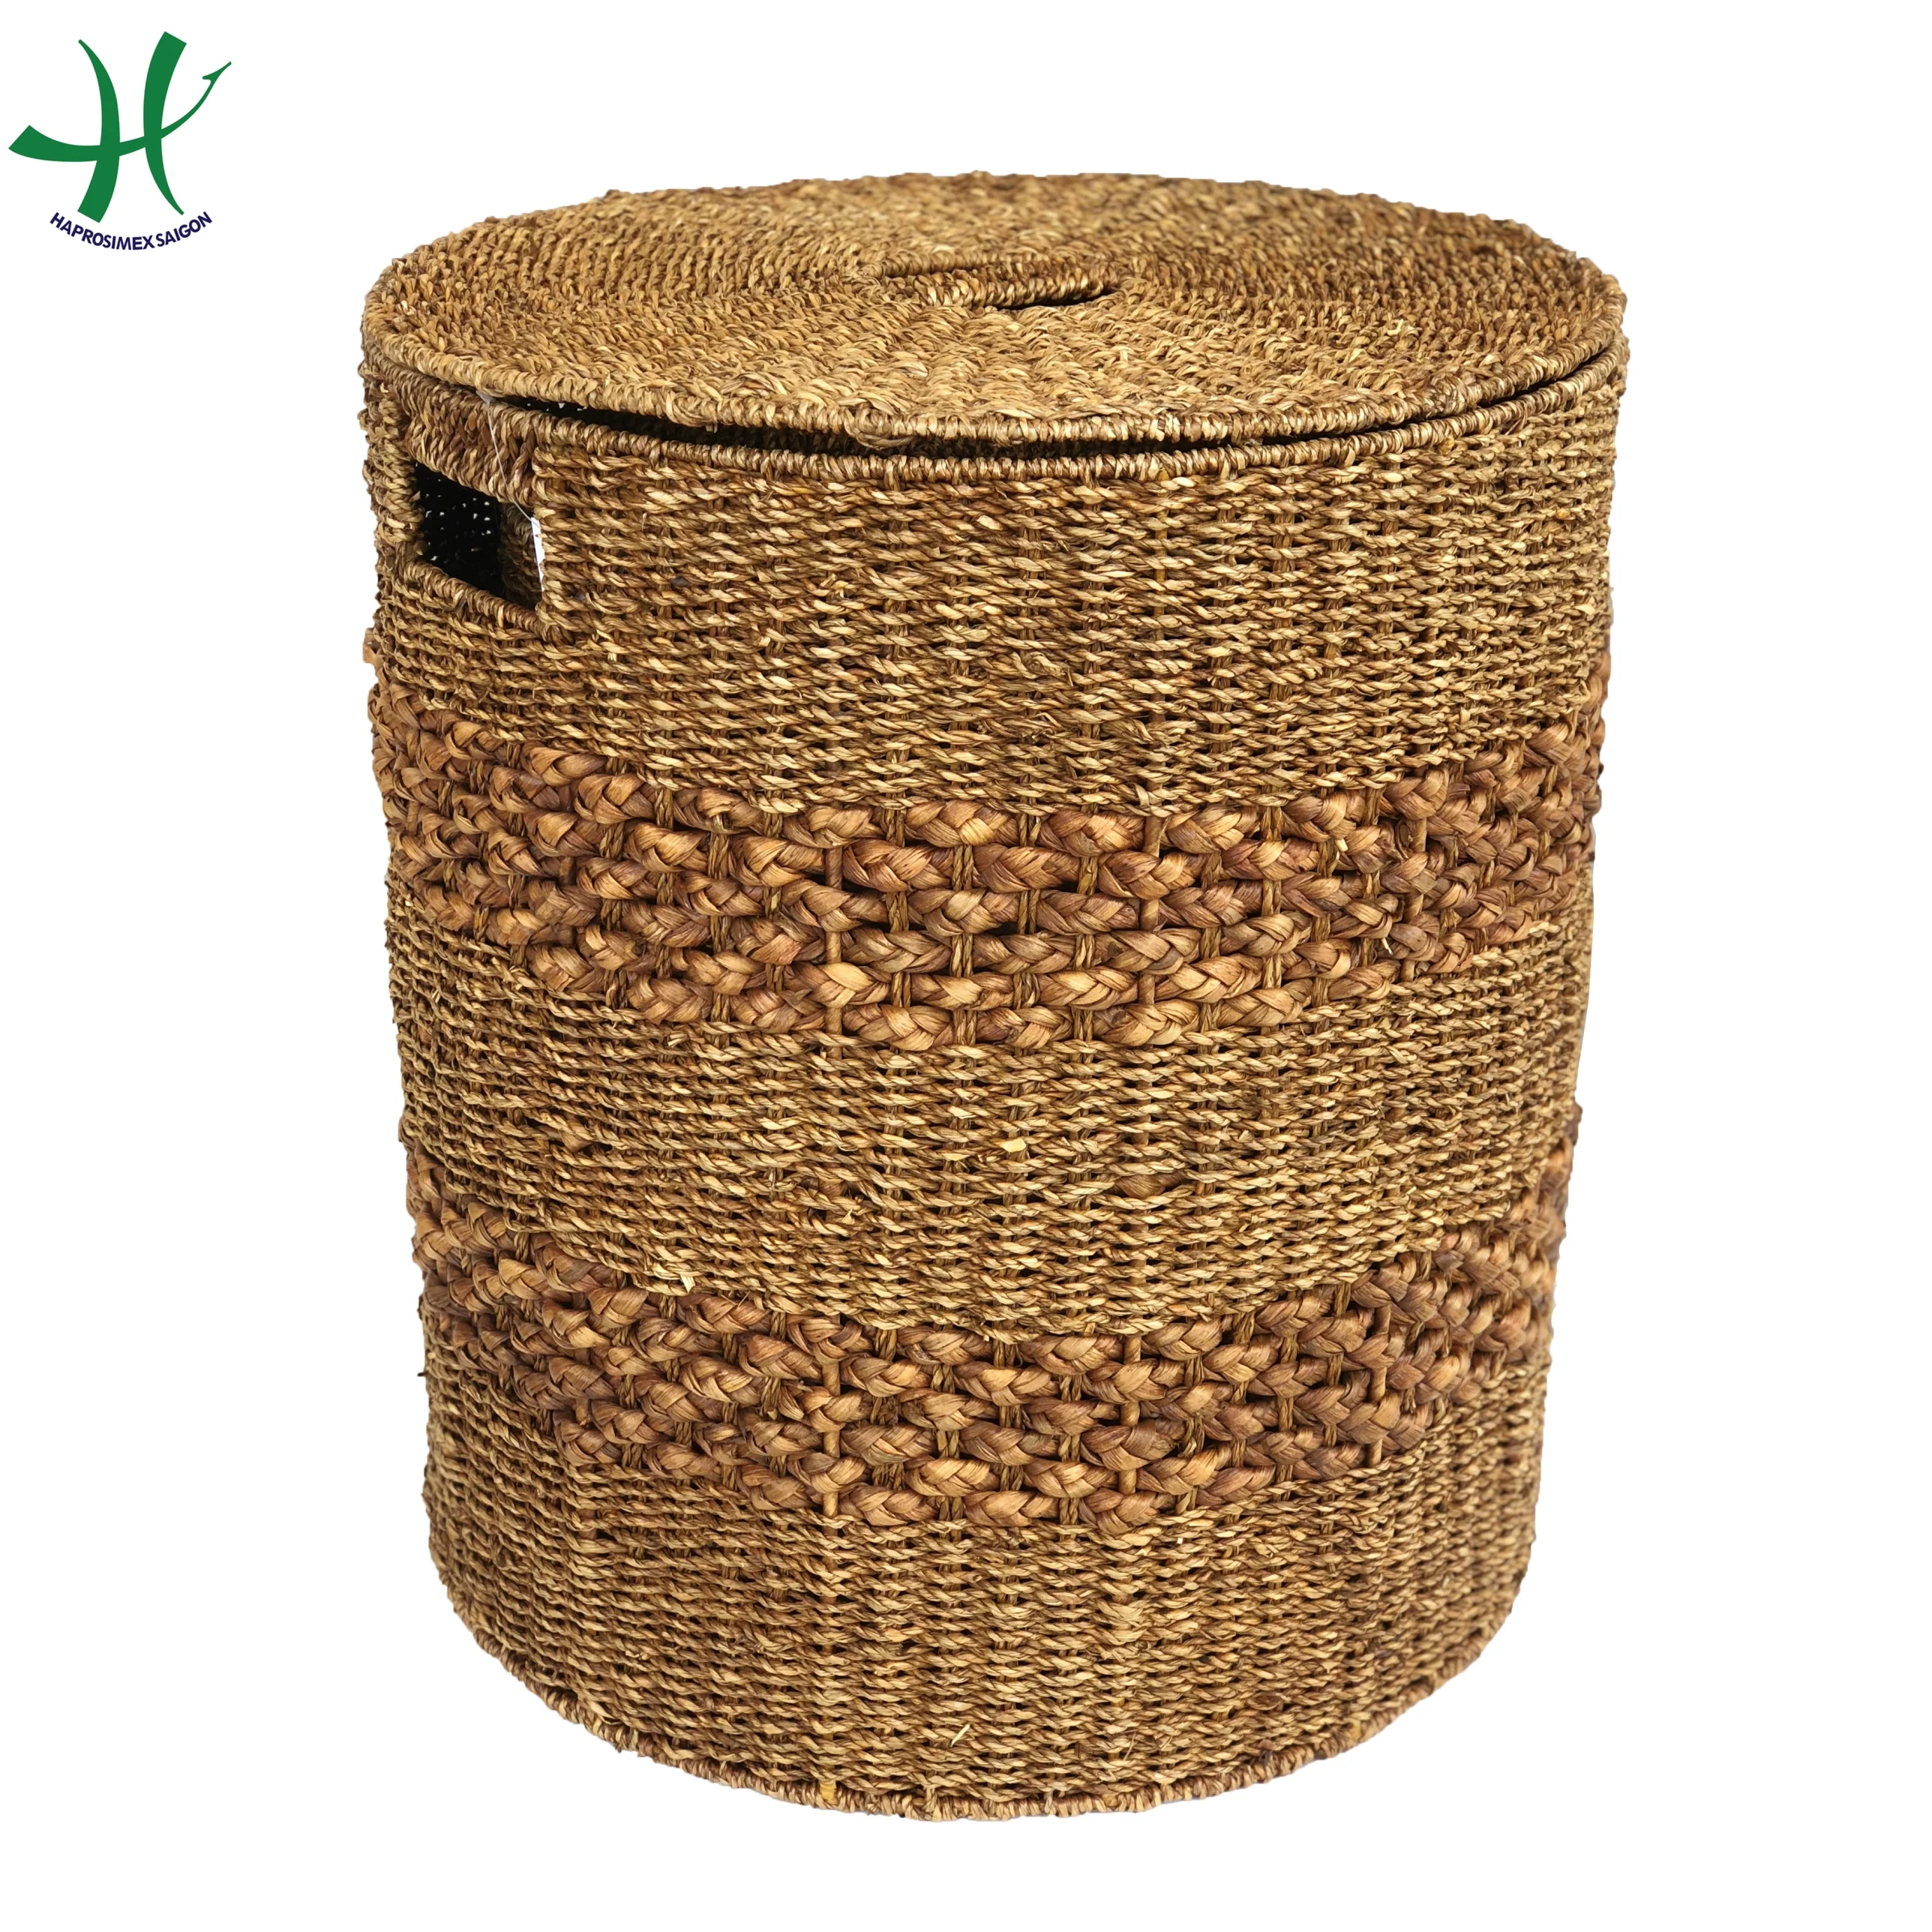 seagrass laundry basket